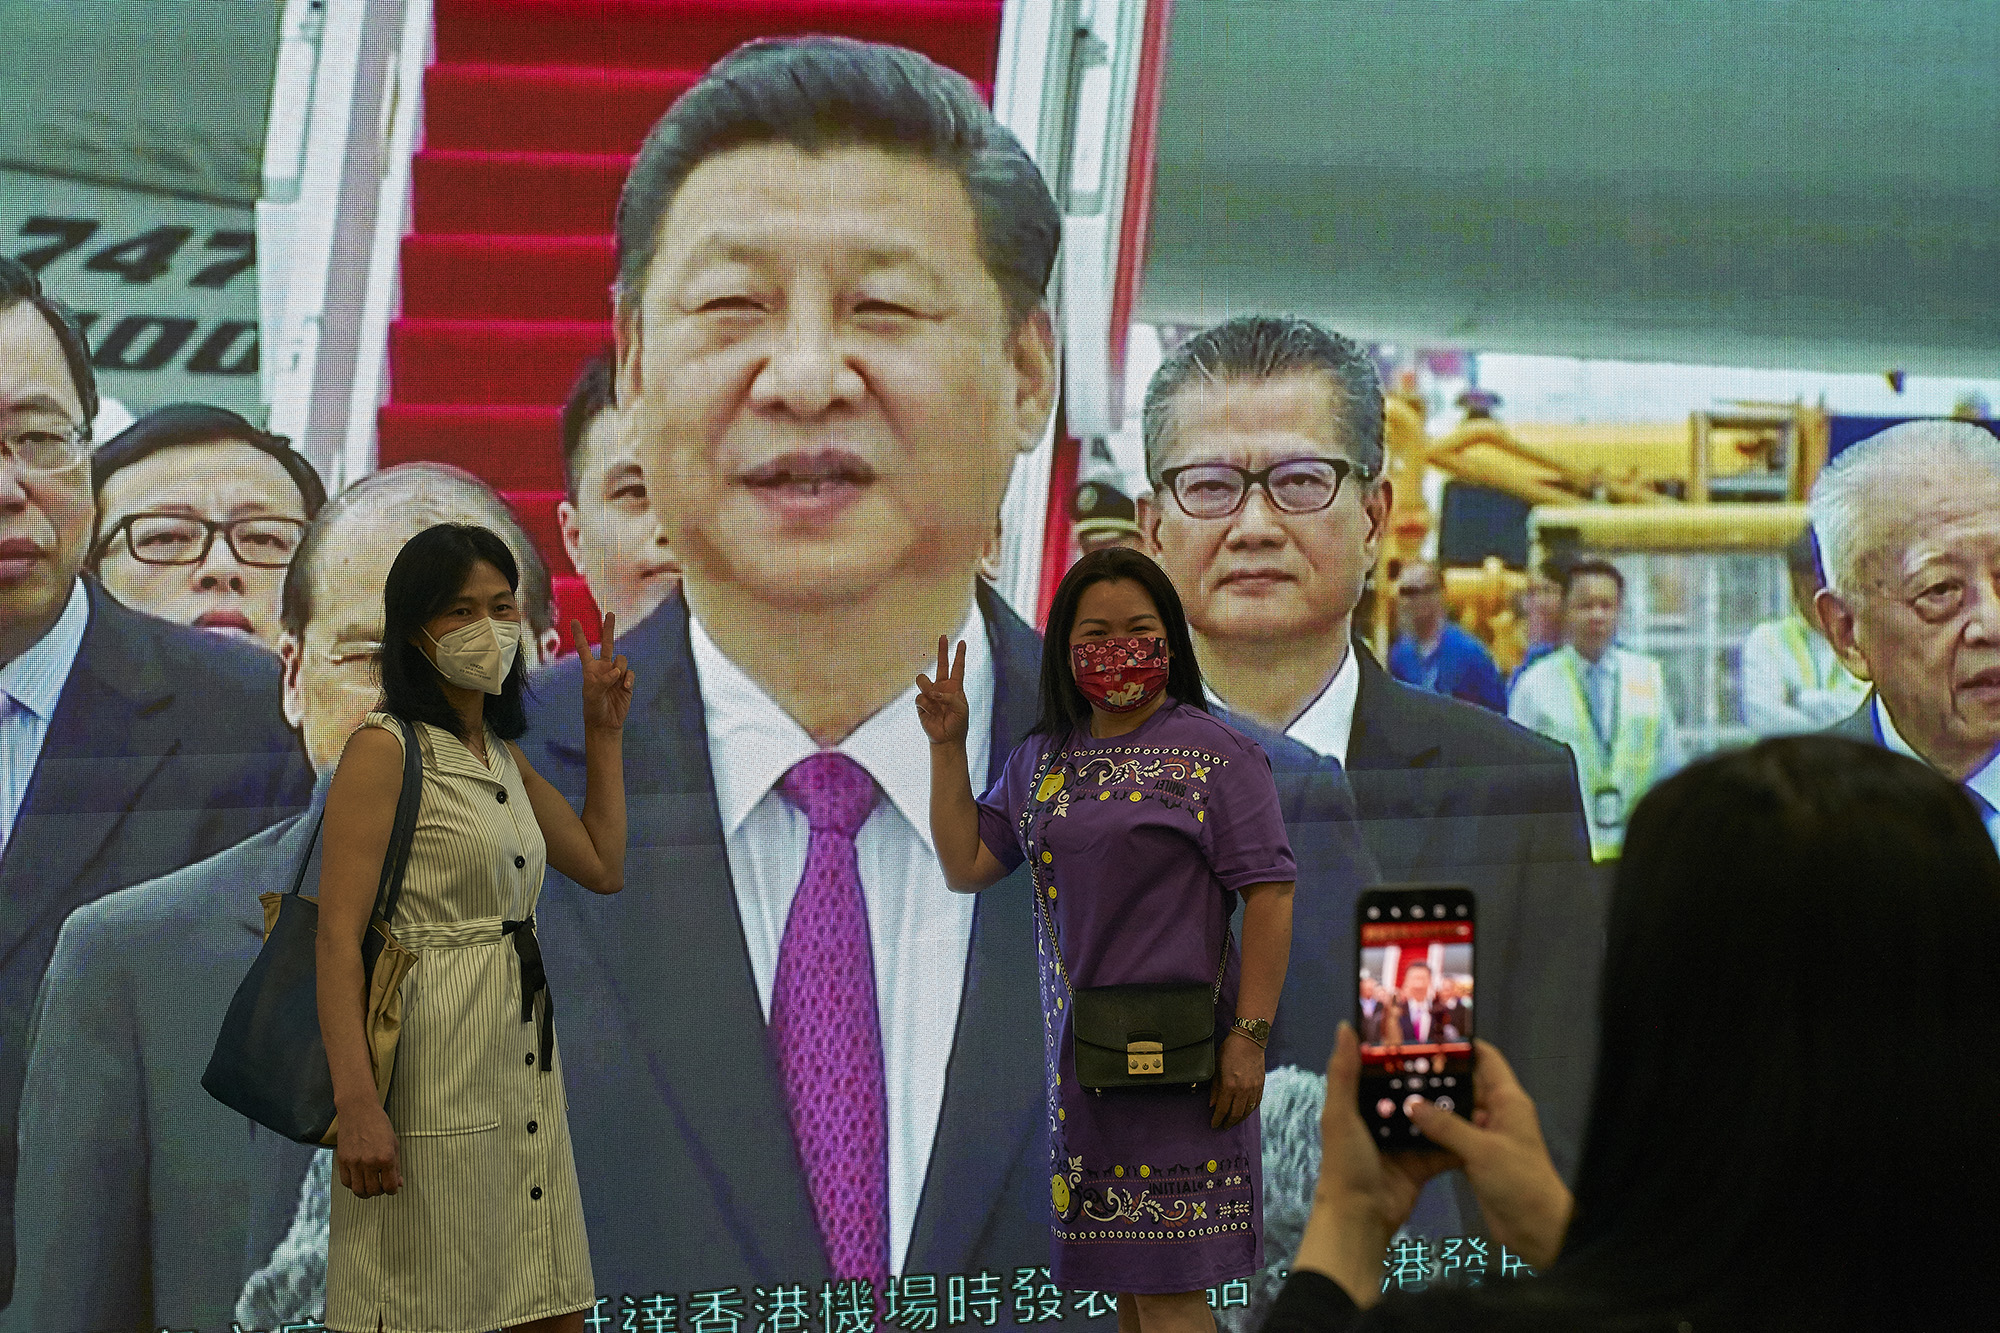 Two women take a photo in front of a poster of the Chinese leader Xi Jinping at an exhibition hall in Hong Kong on June 28.